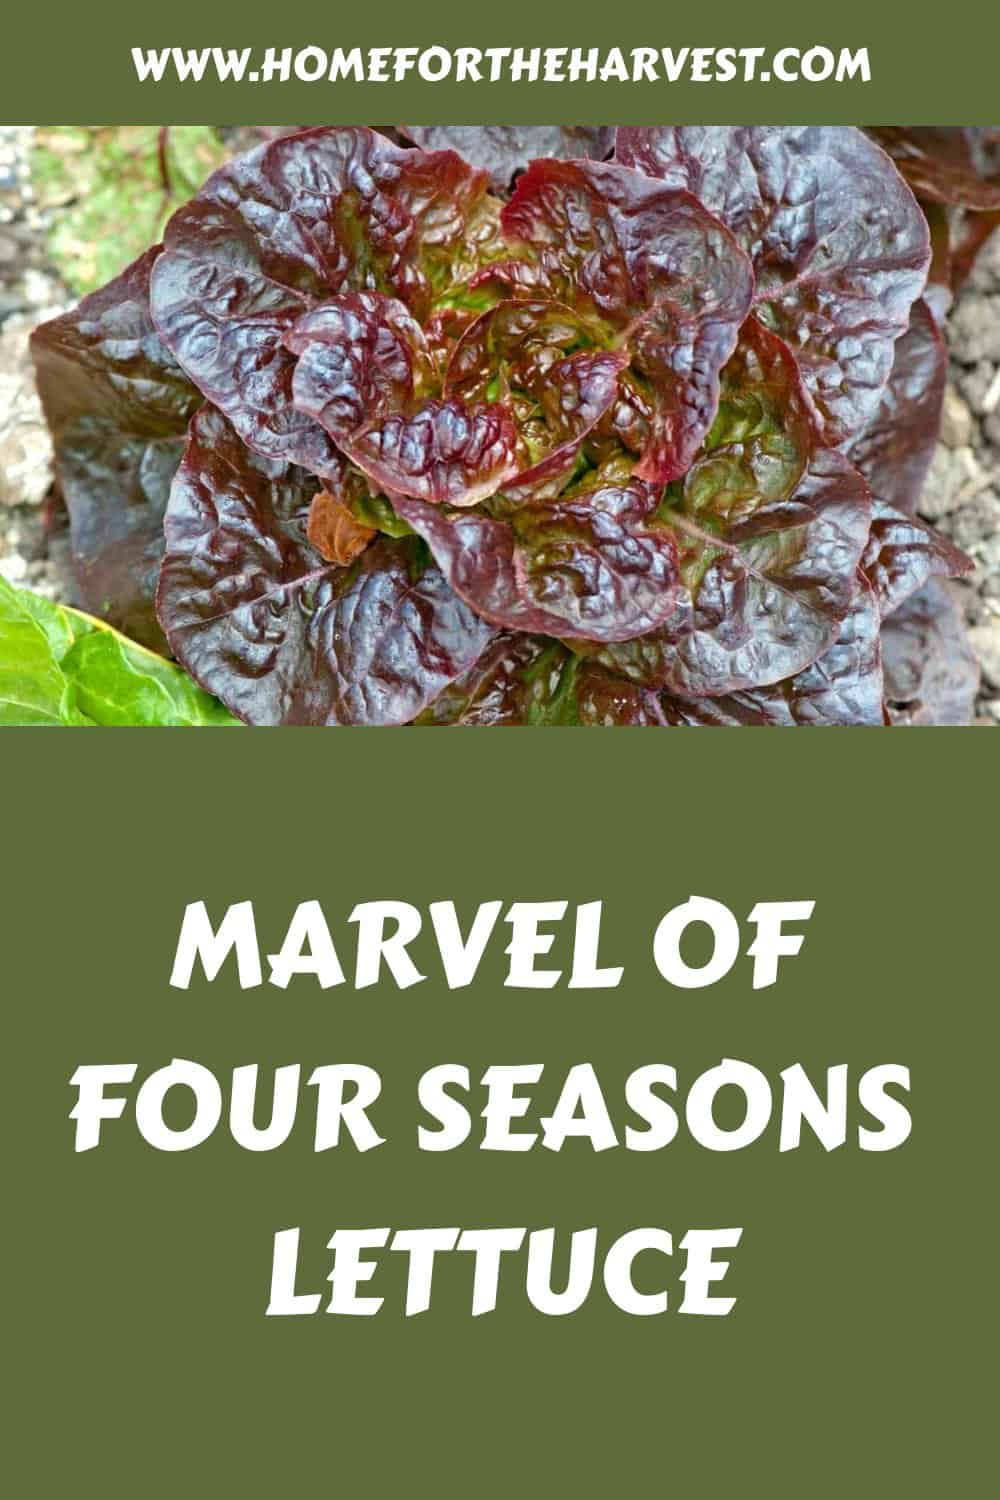 Marvel of four seasons lettuce generated pin 37582 1